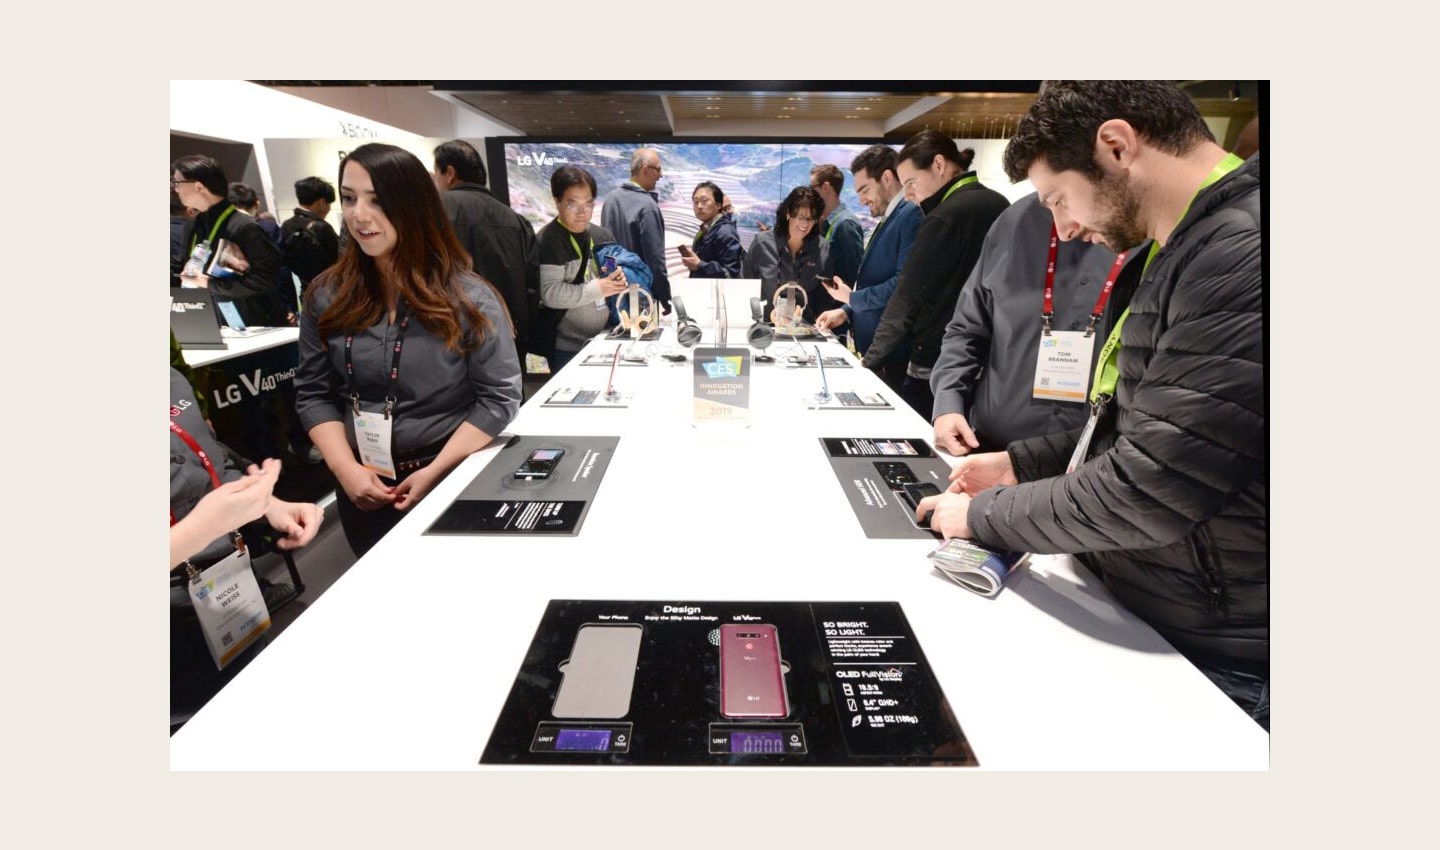 Numerous CES attendees test out the new features of LG's smartphones including LG V40 ThinQ